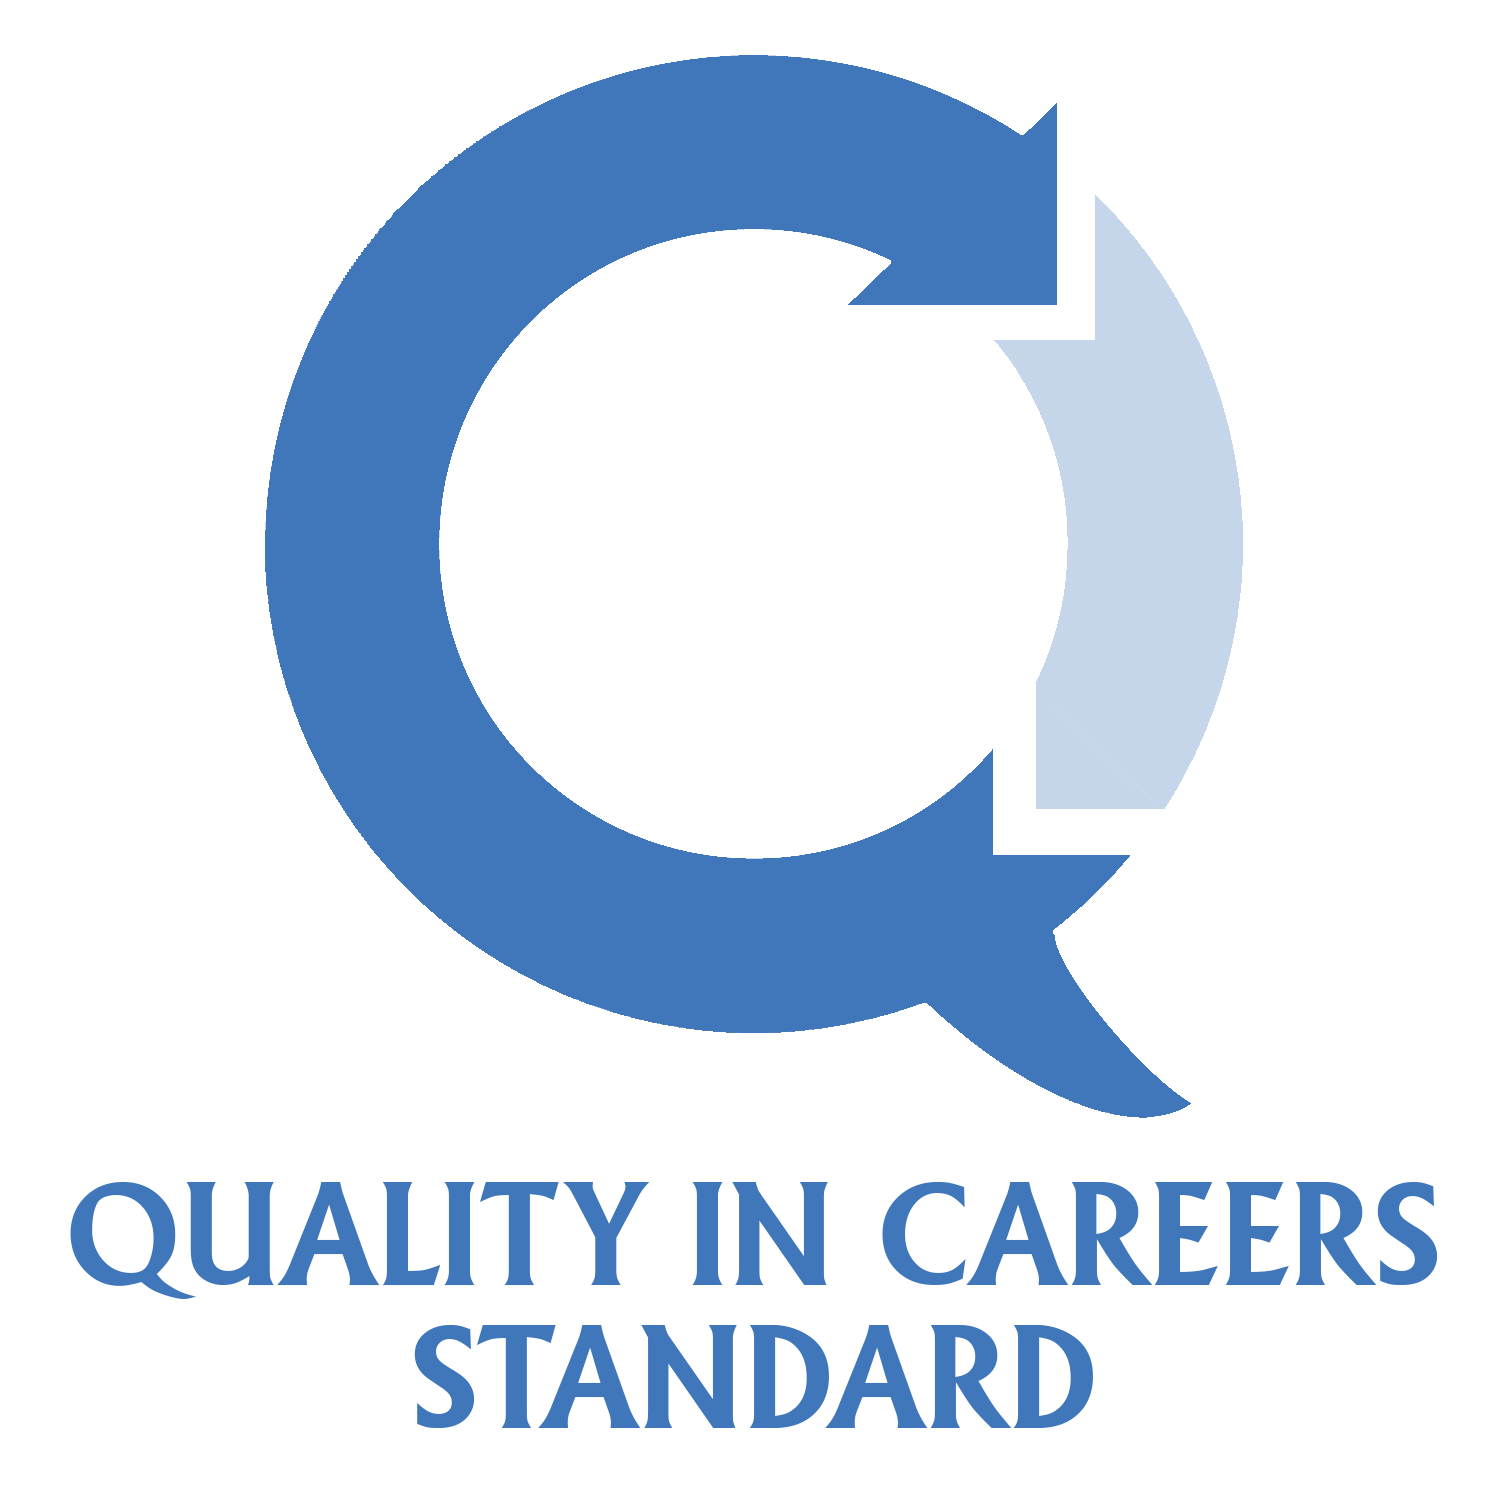 The Quality in Careers Standard